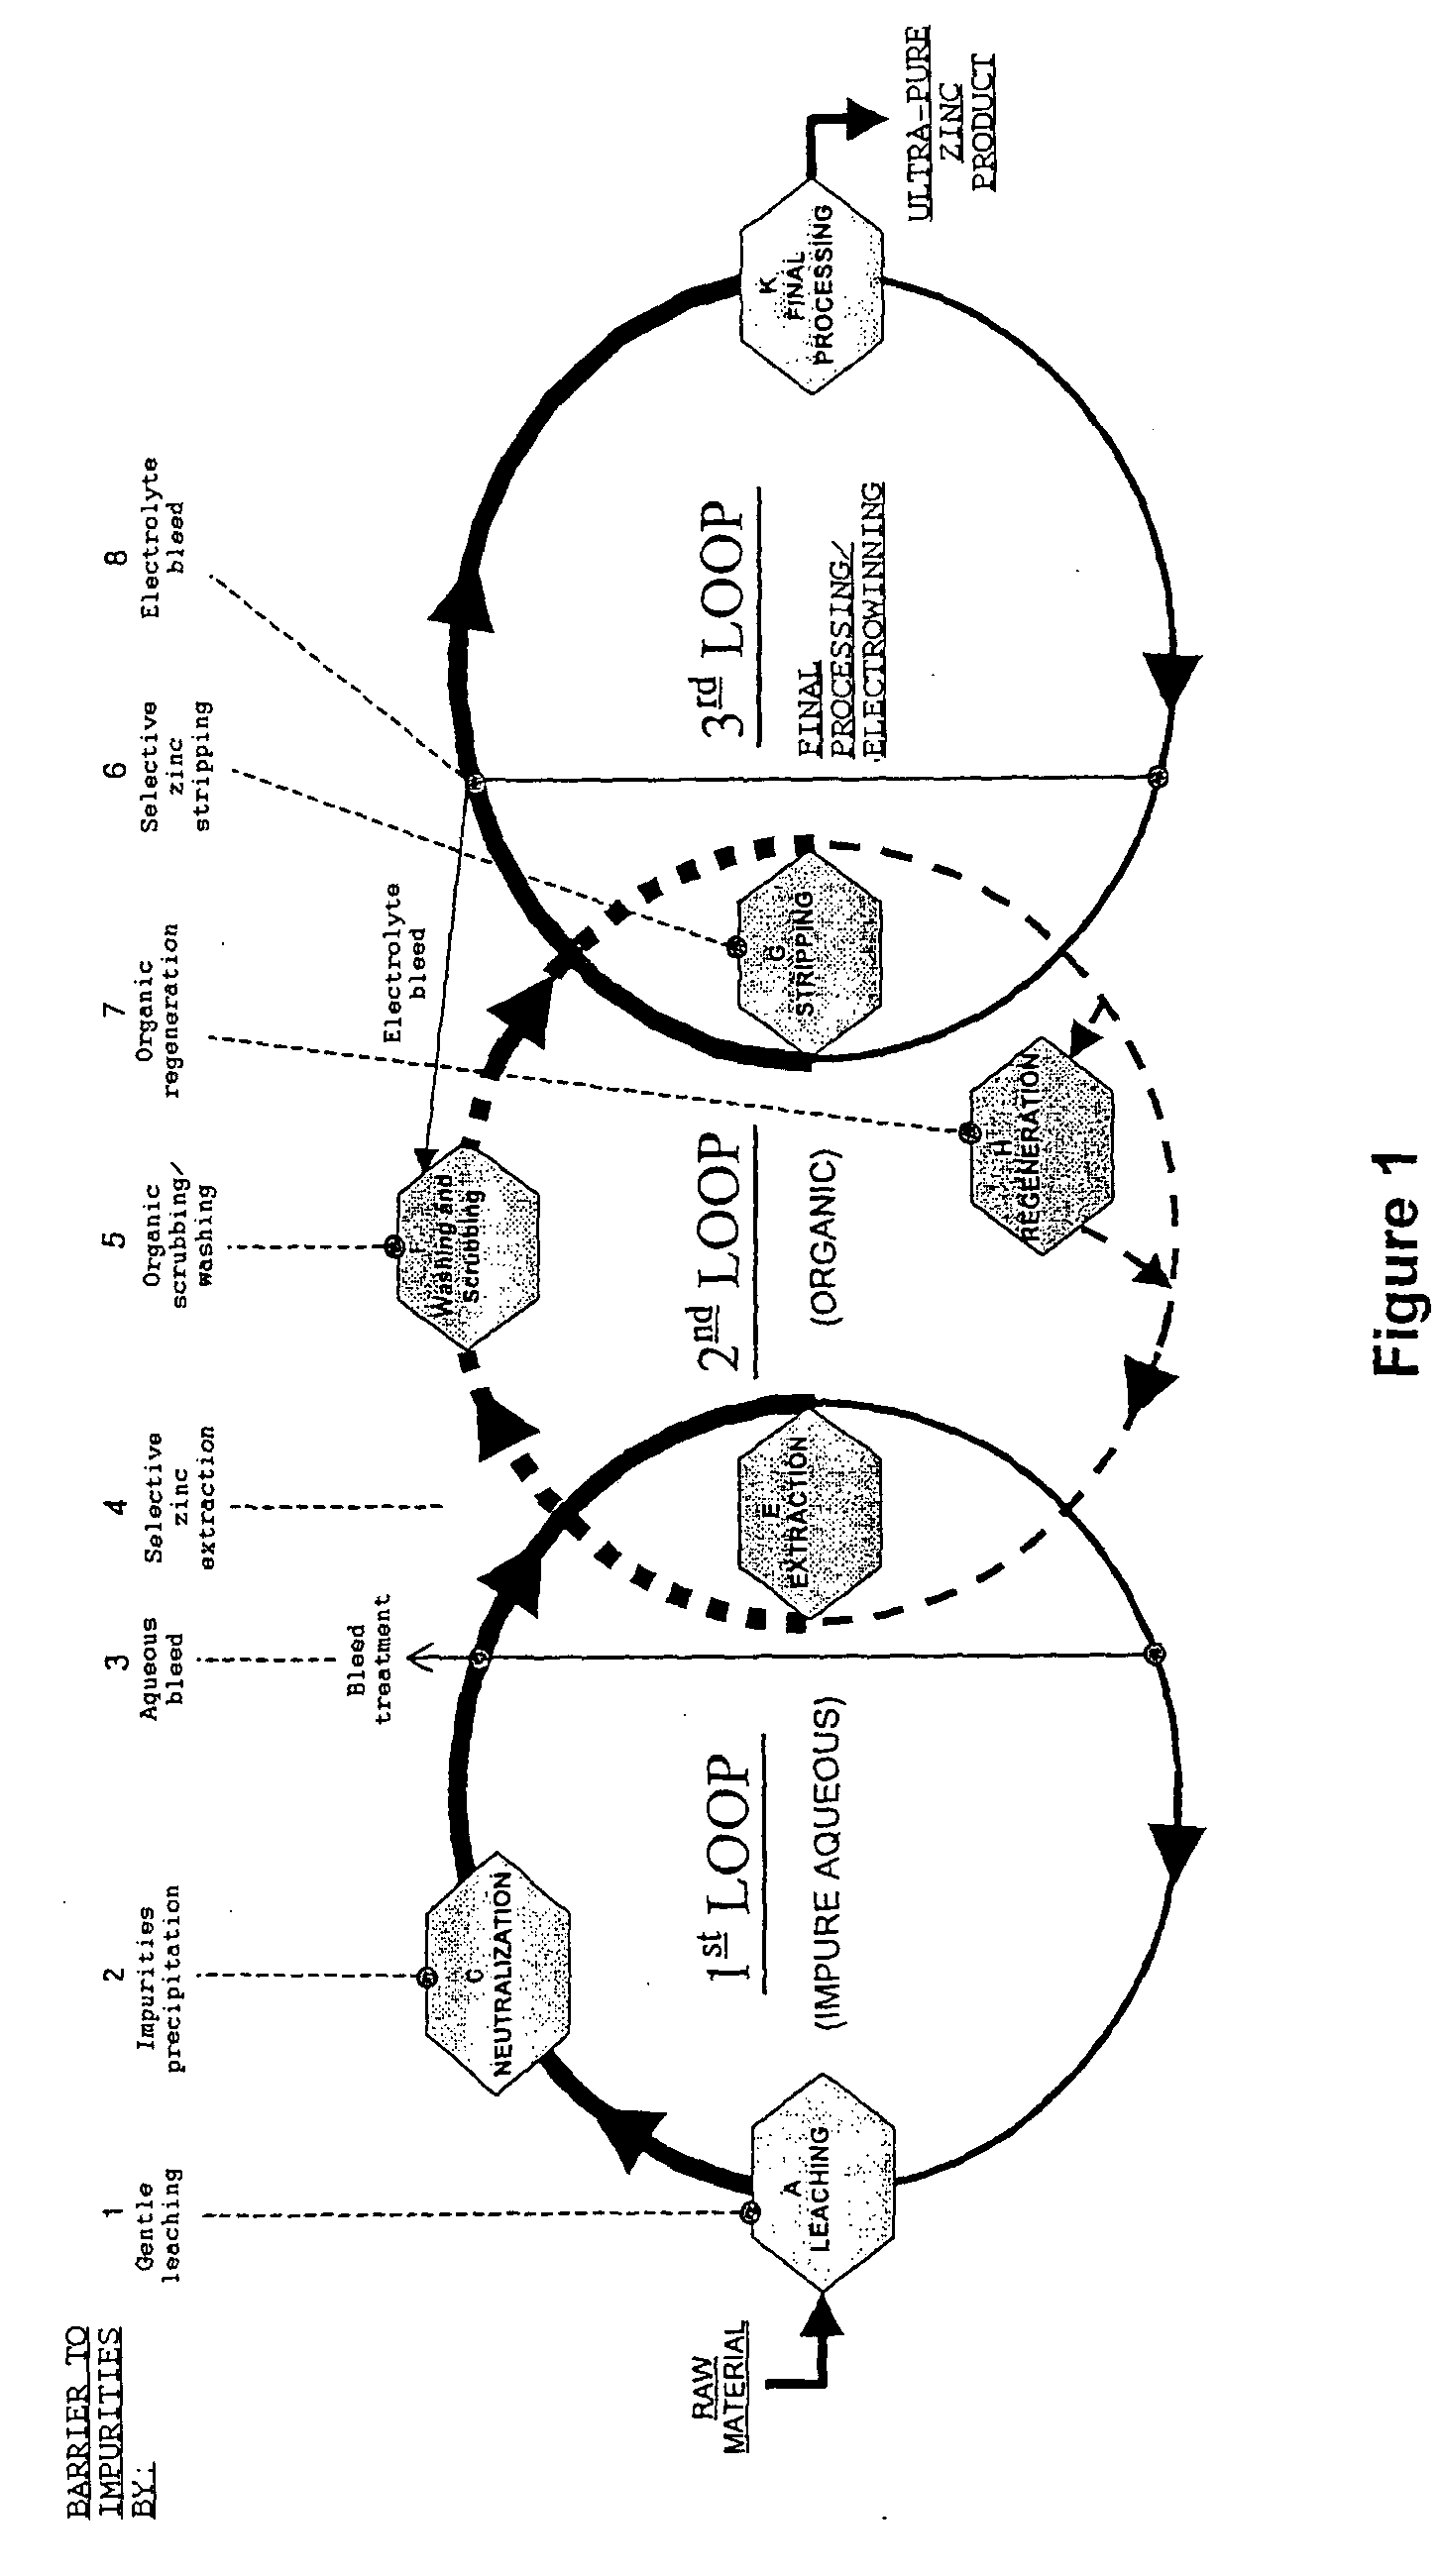 Process for electrolytic production of ultra-pure zinc or zinc compounds from zinc primary and secondary raw materials